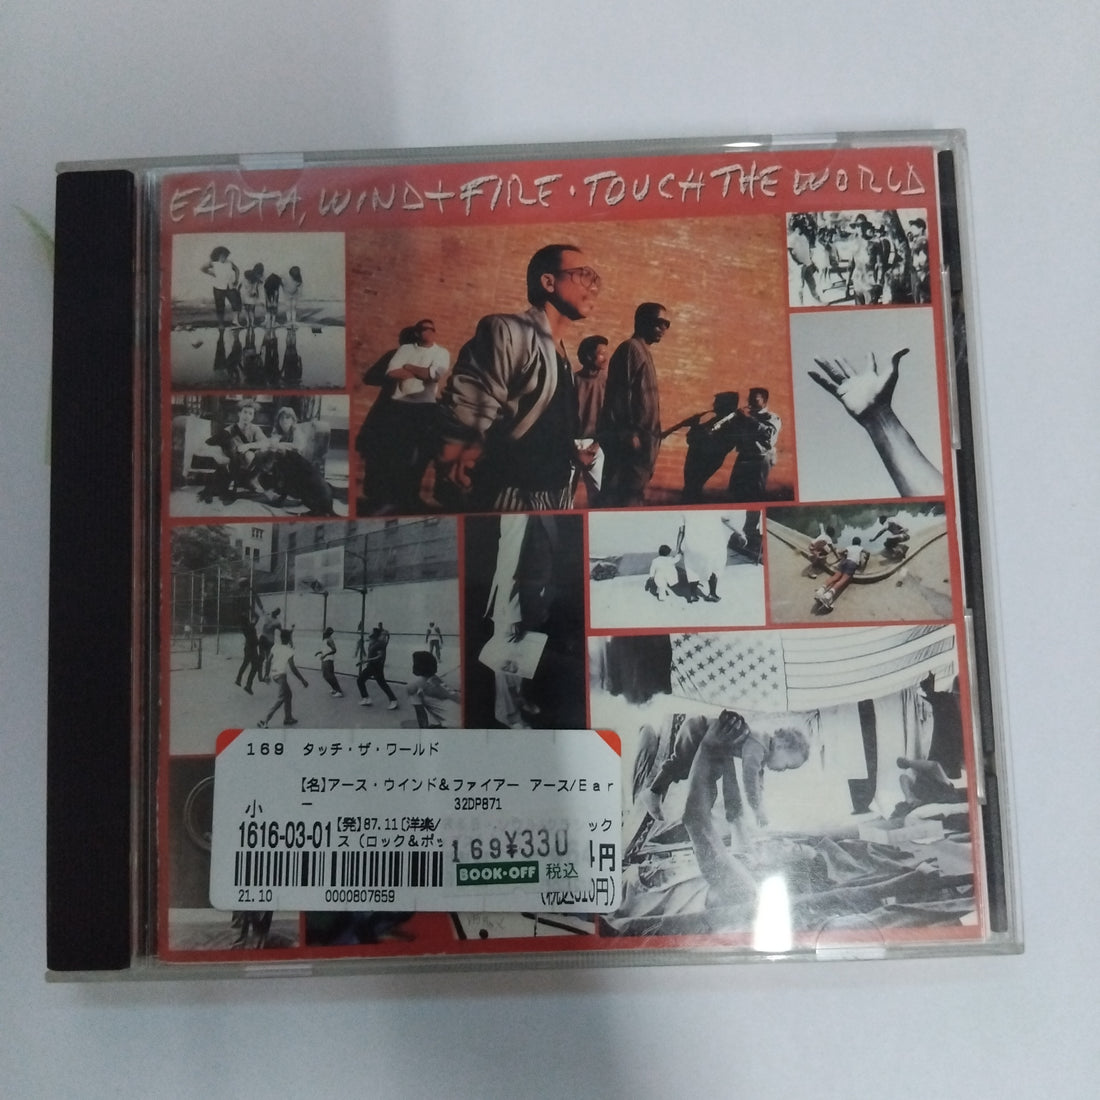 Earth, Wind & Fire - Touch The World (CD) (VG+)